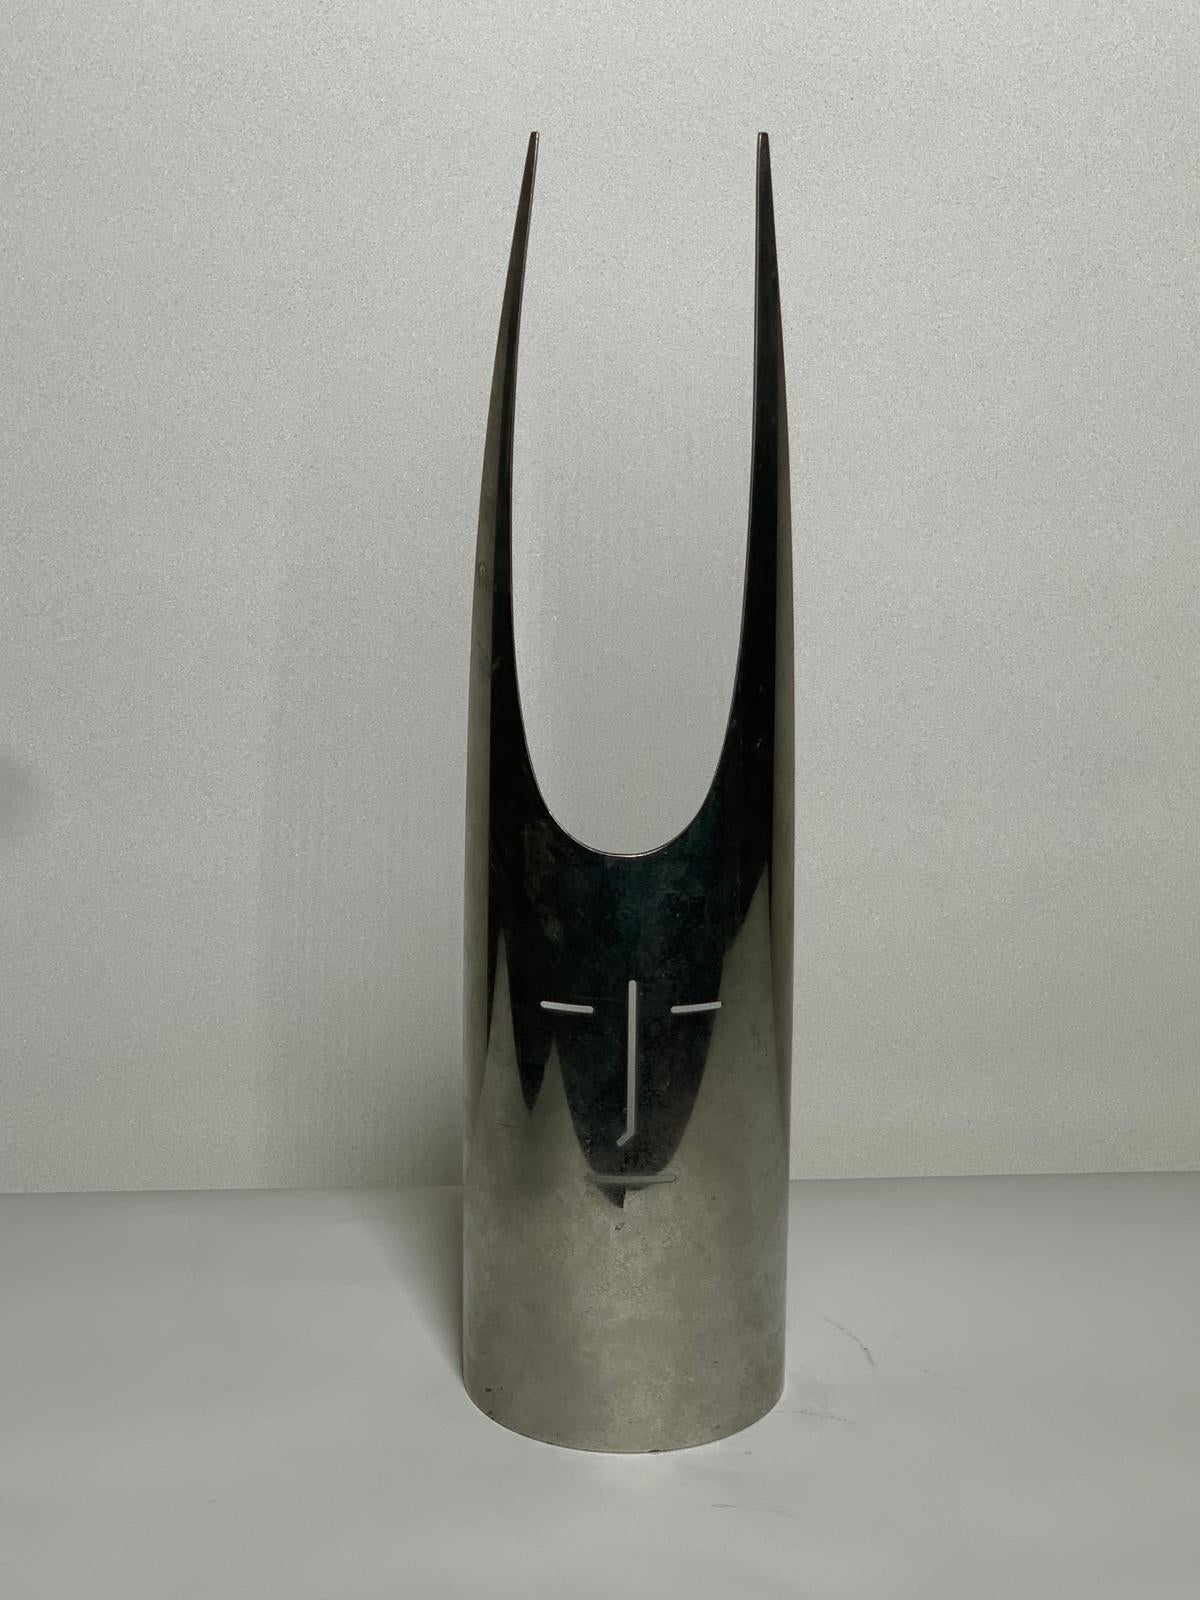 Sculpture in perforated plate and silver metal.
Sabattini production. Signature under the base.

Biography
Architect, designer and artist, Gio Ponti (Milan 1891-1979) graduated in Milan in 1921 and initially associated with Emilio Lancia and Mino